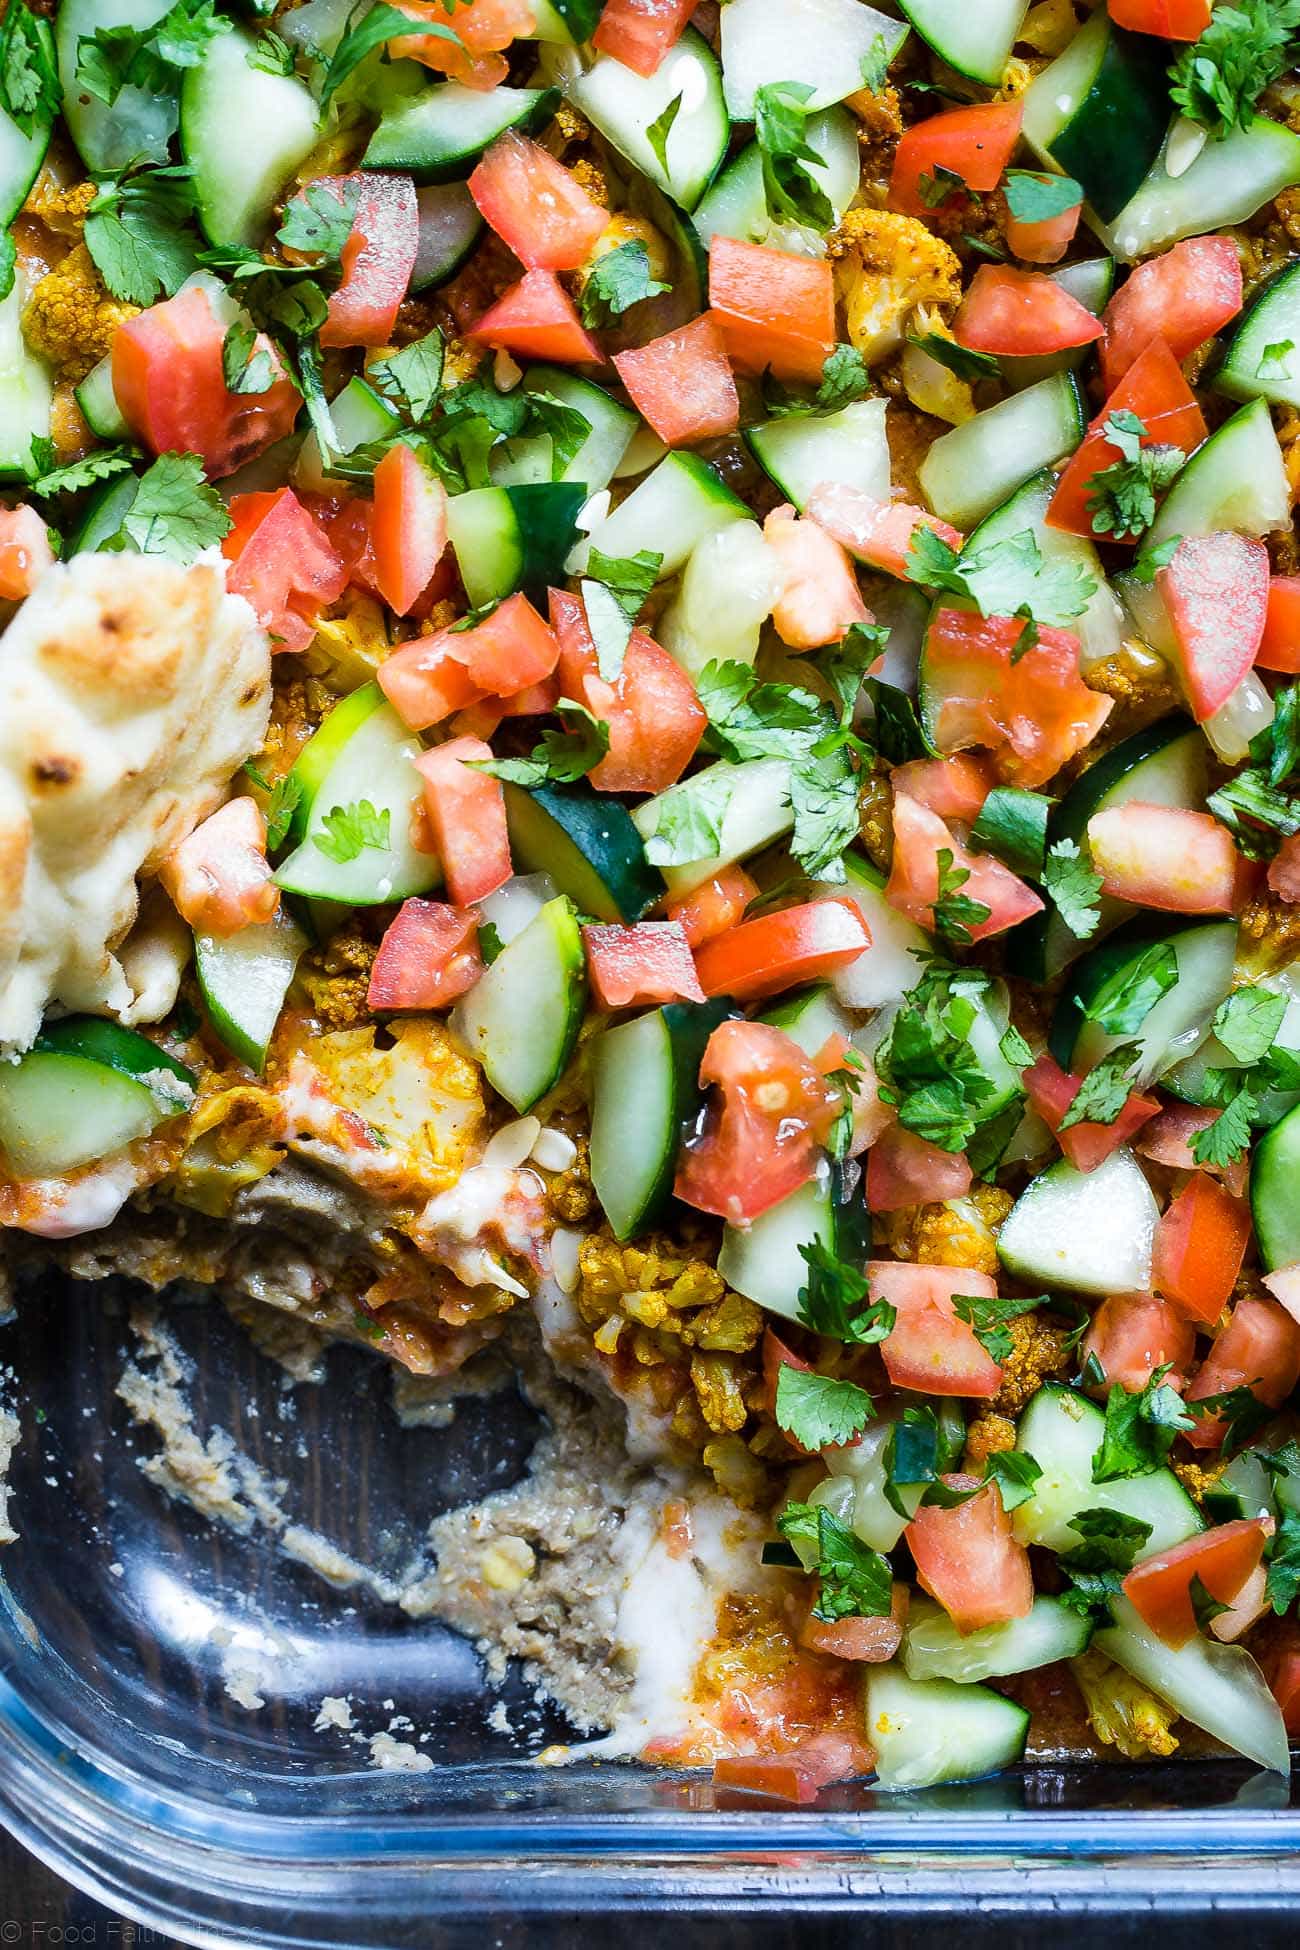 Healthy Indian 7 Layer Dip - The classic 7 layer dip recipe gets a healthy, Indian makeover! This dip is loaded with spicy, ethnic flavors and is gluten free and vegan friendly too! It's only 170 calories and perfect for game day! | Foodfaithfitness.com | @FoodFaithFit